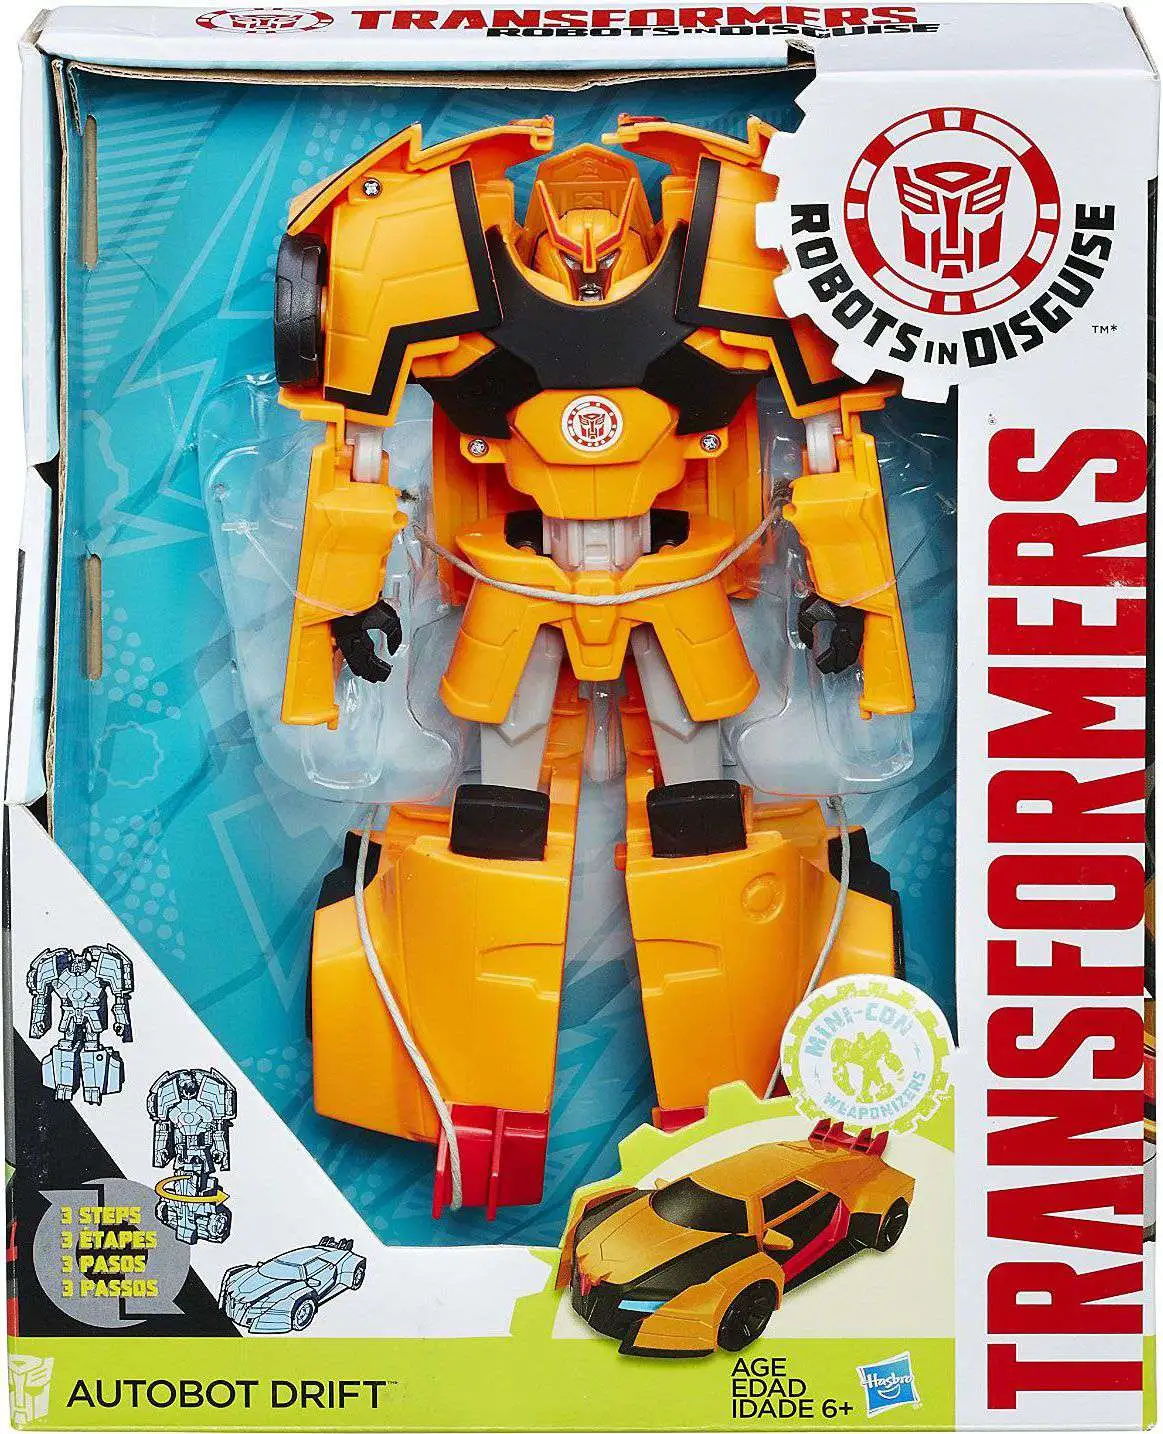 Transformers Robots in Disguise Hyper Change Autobot 10 Action Figure 3-Step Changer Hasbro - ToyWiz